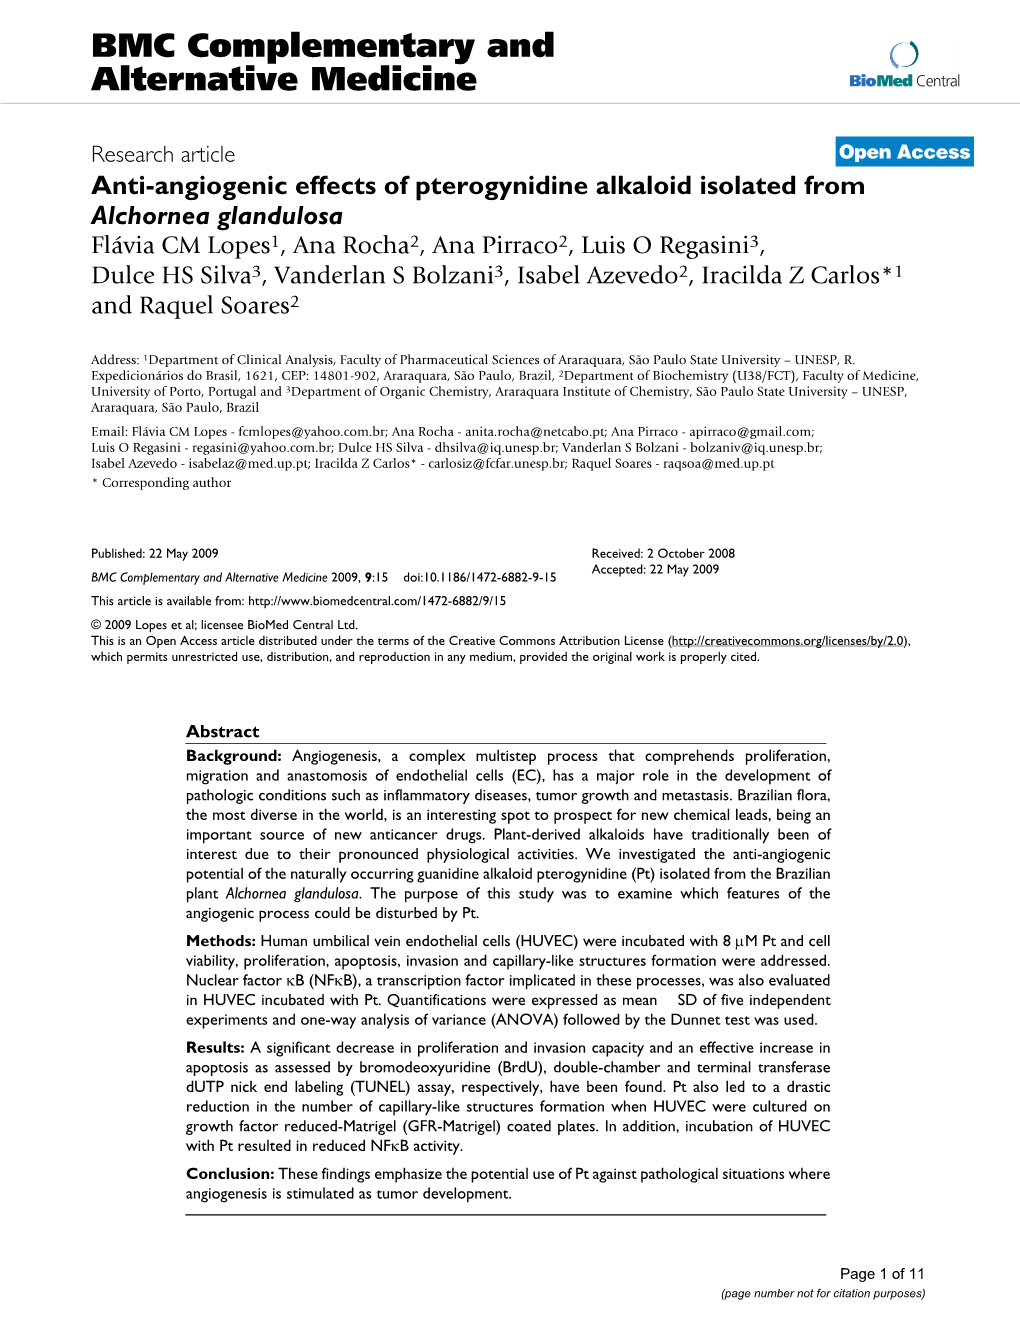 Anti-Angiogenic Effects of Pterogynidine Alkaloid Isolated From